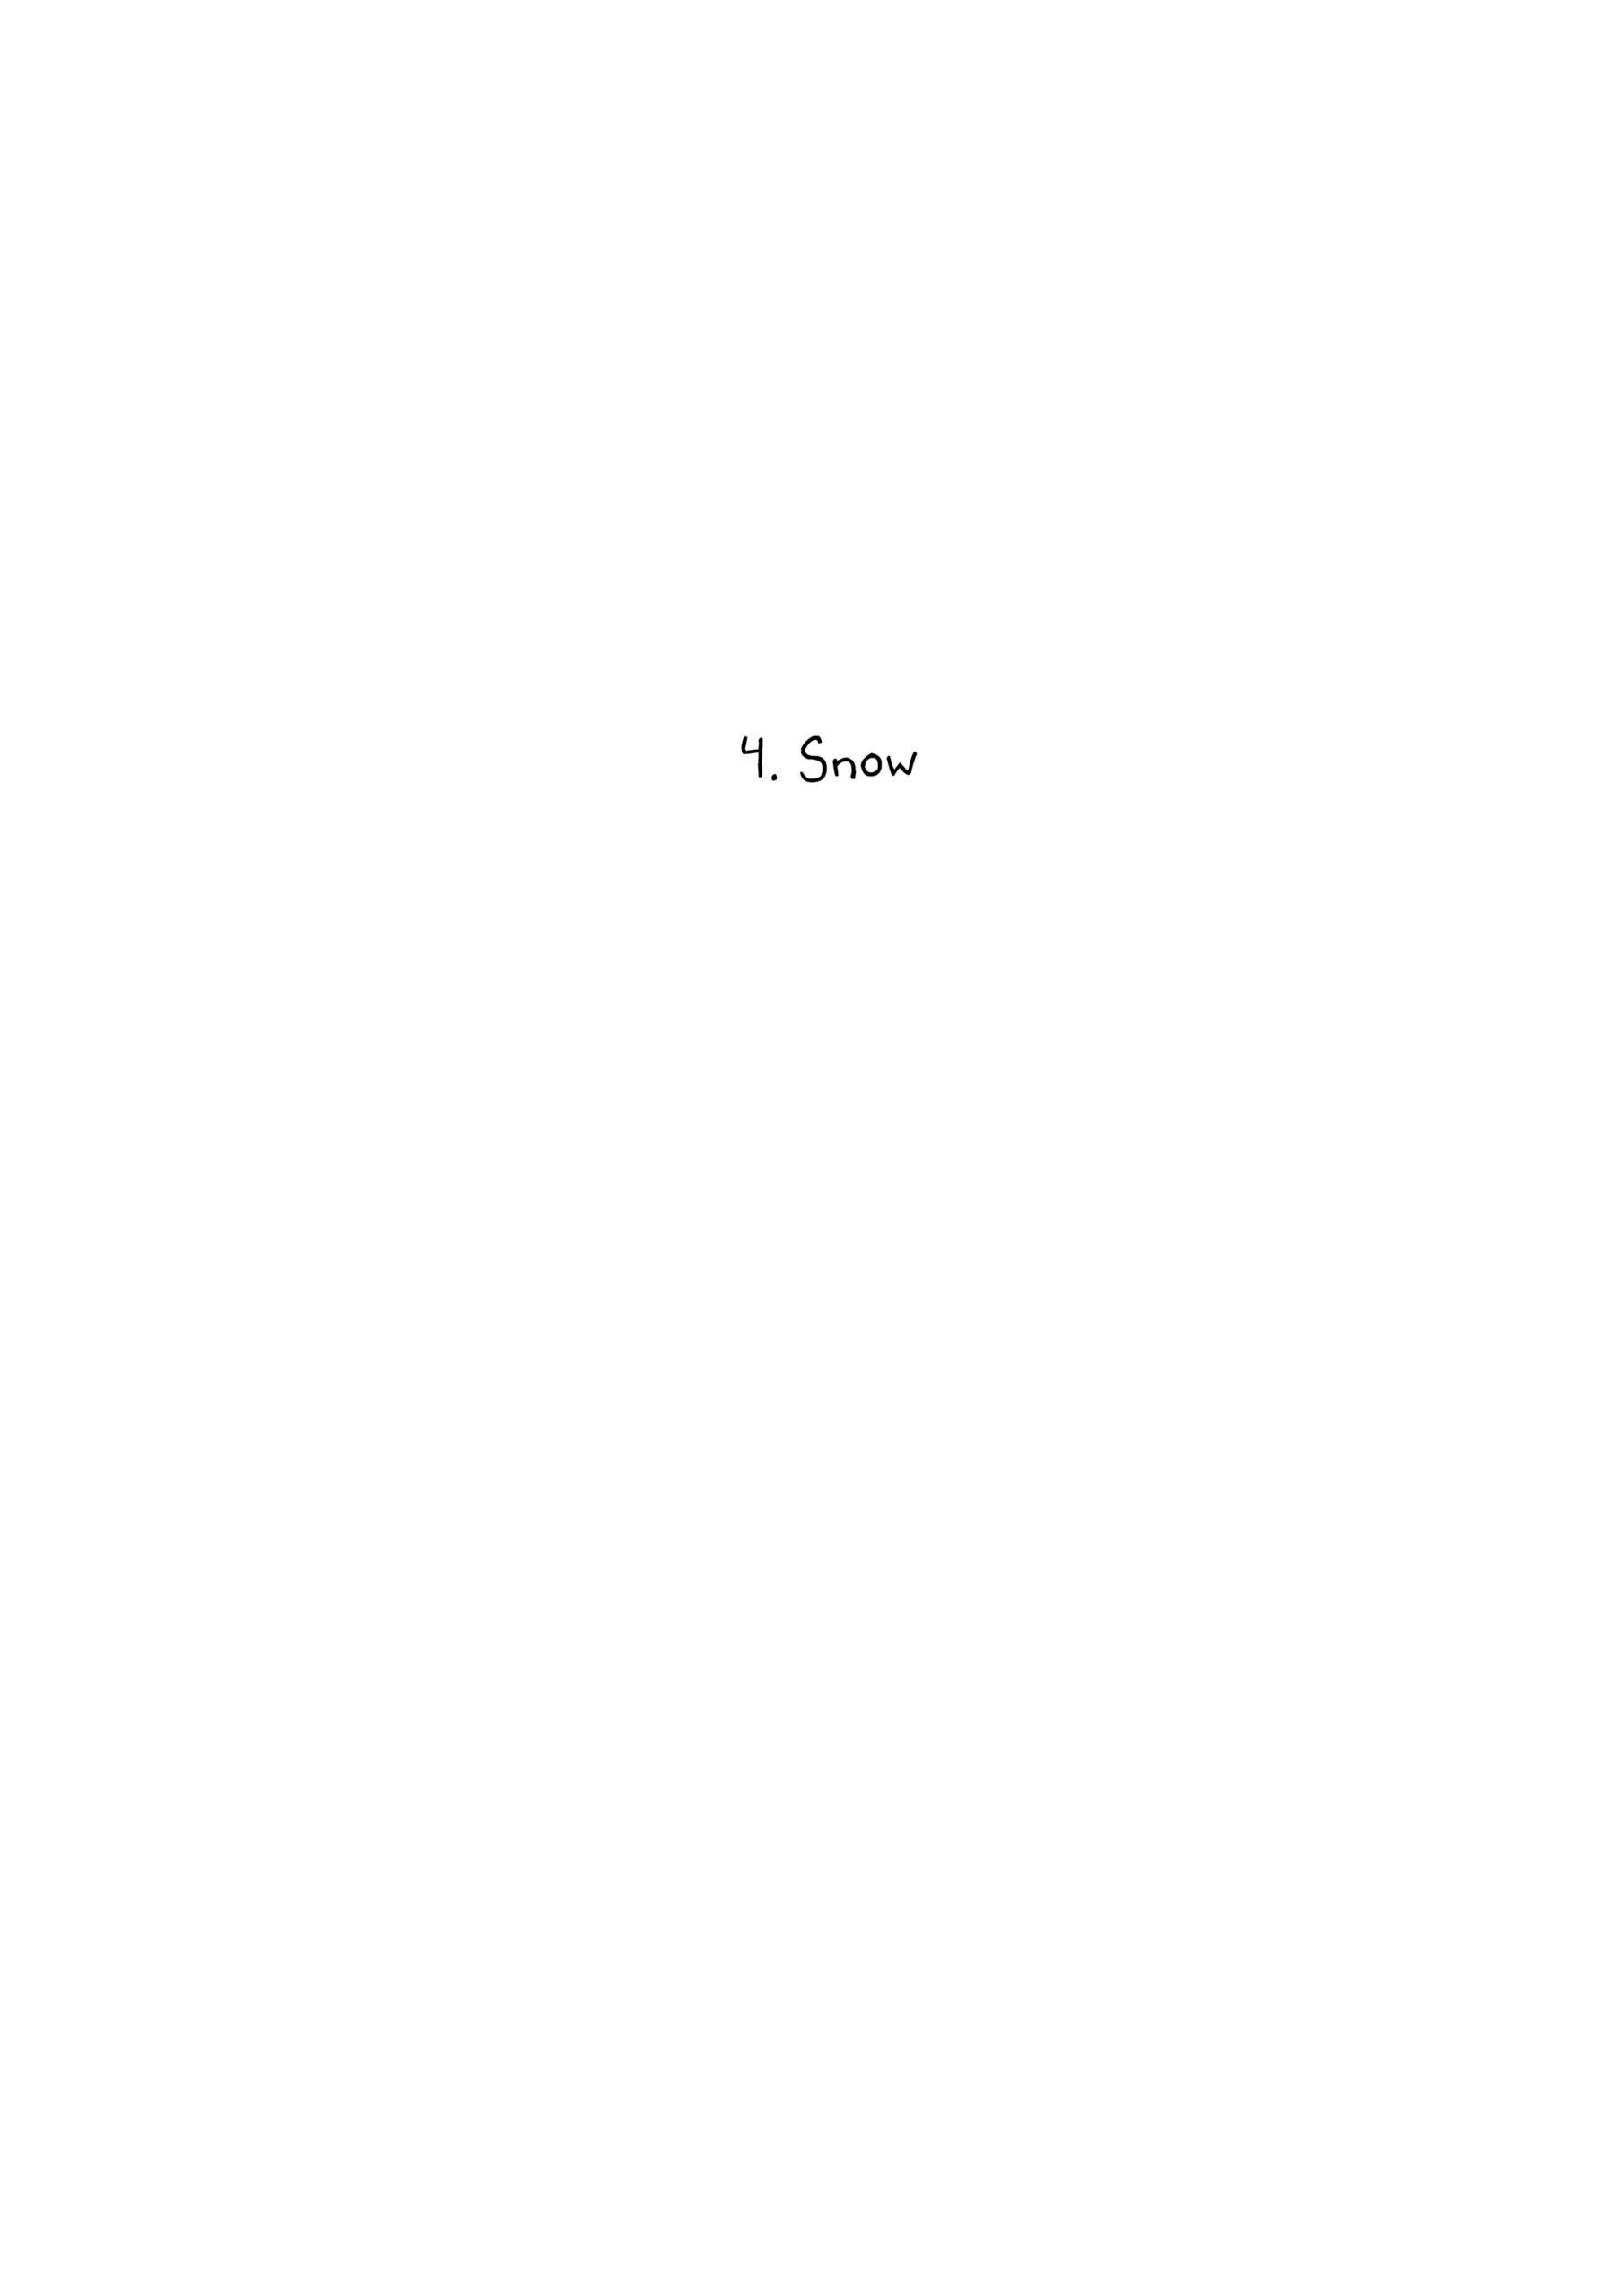 A blank white page, with the chapter title centered in the upper half: "4. Snow"